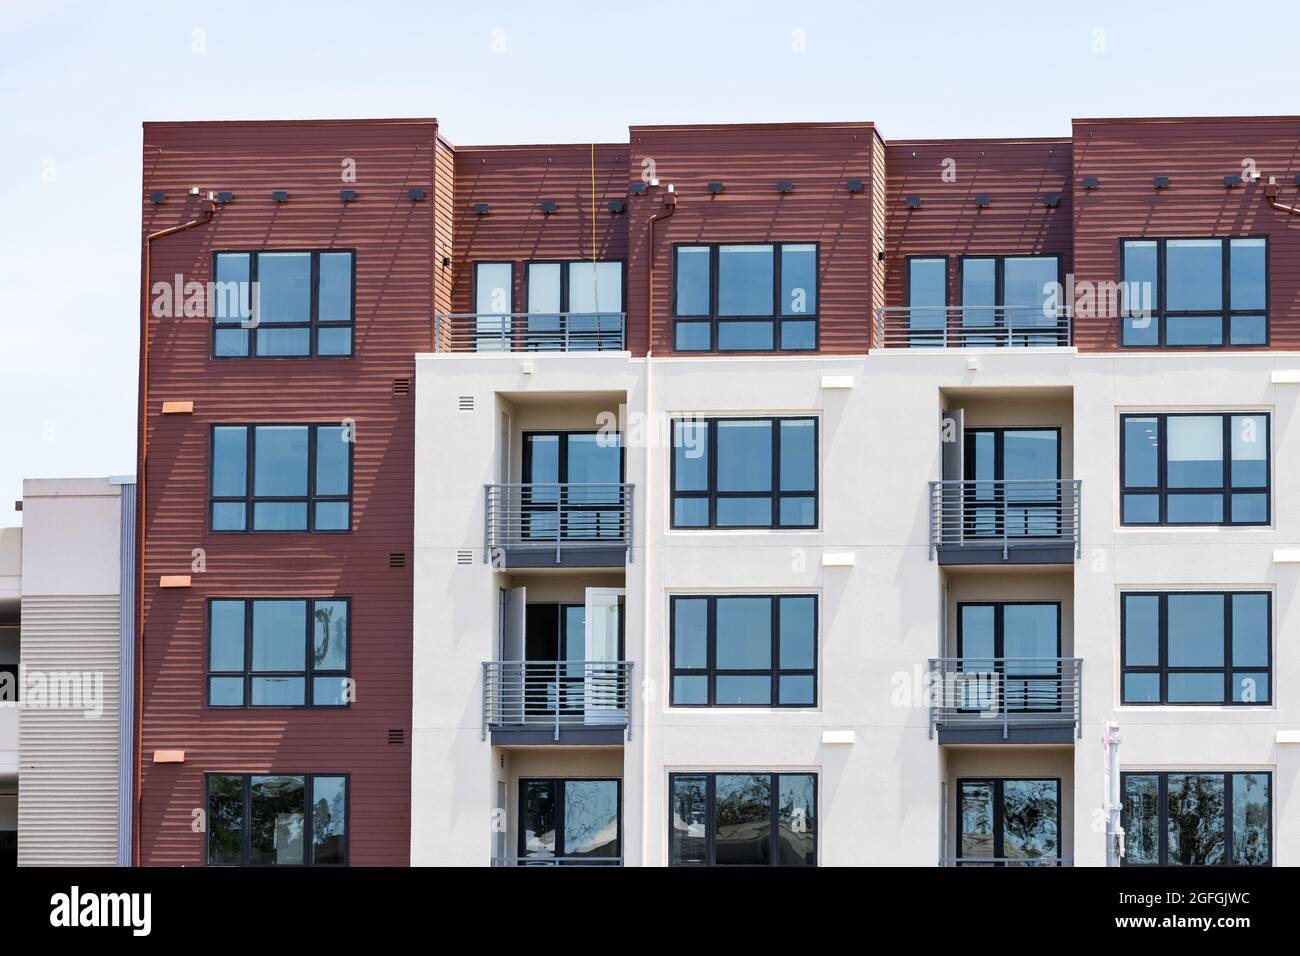 Exterior view of modern apartment building offering luxury rental units in Silicon Valley; Sunnyvale, San Francisco bay area, California Stock Photo